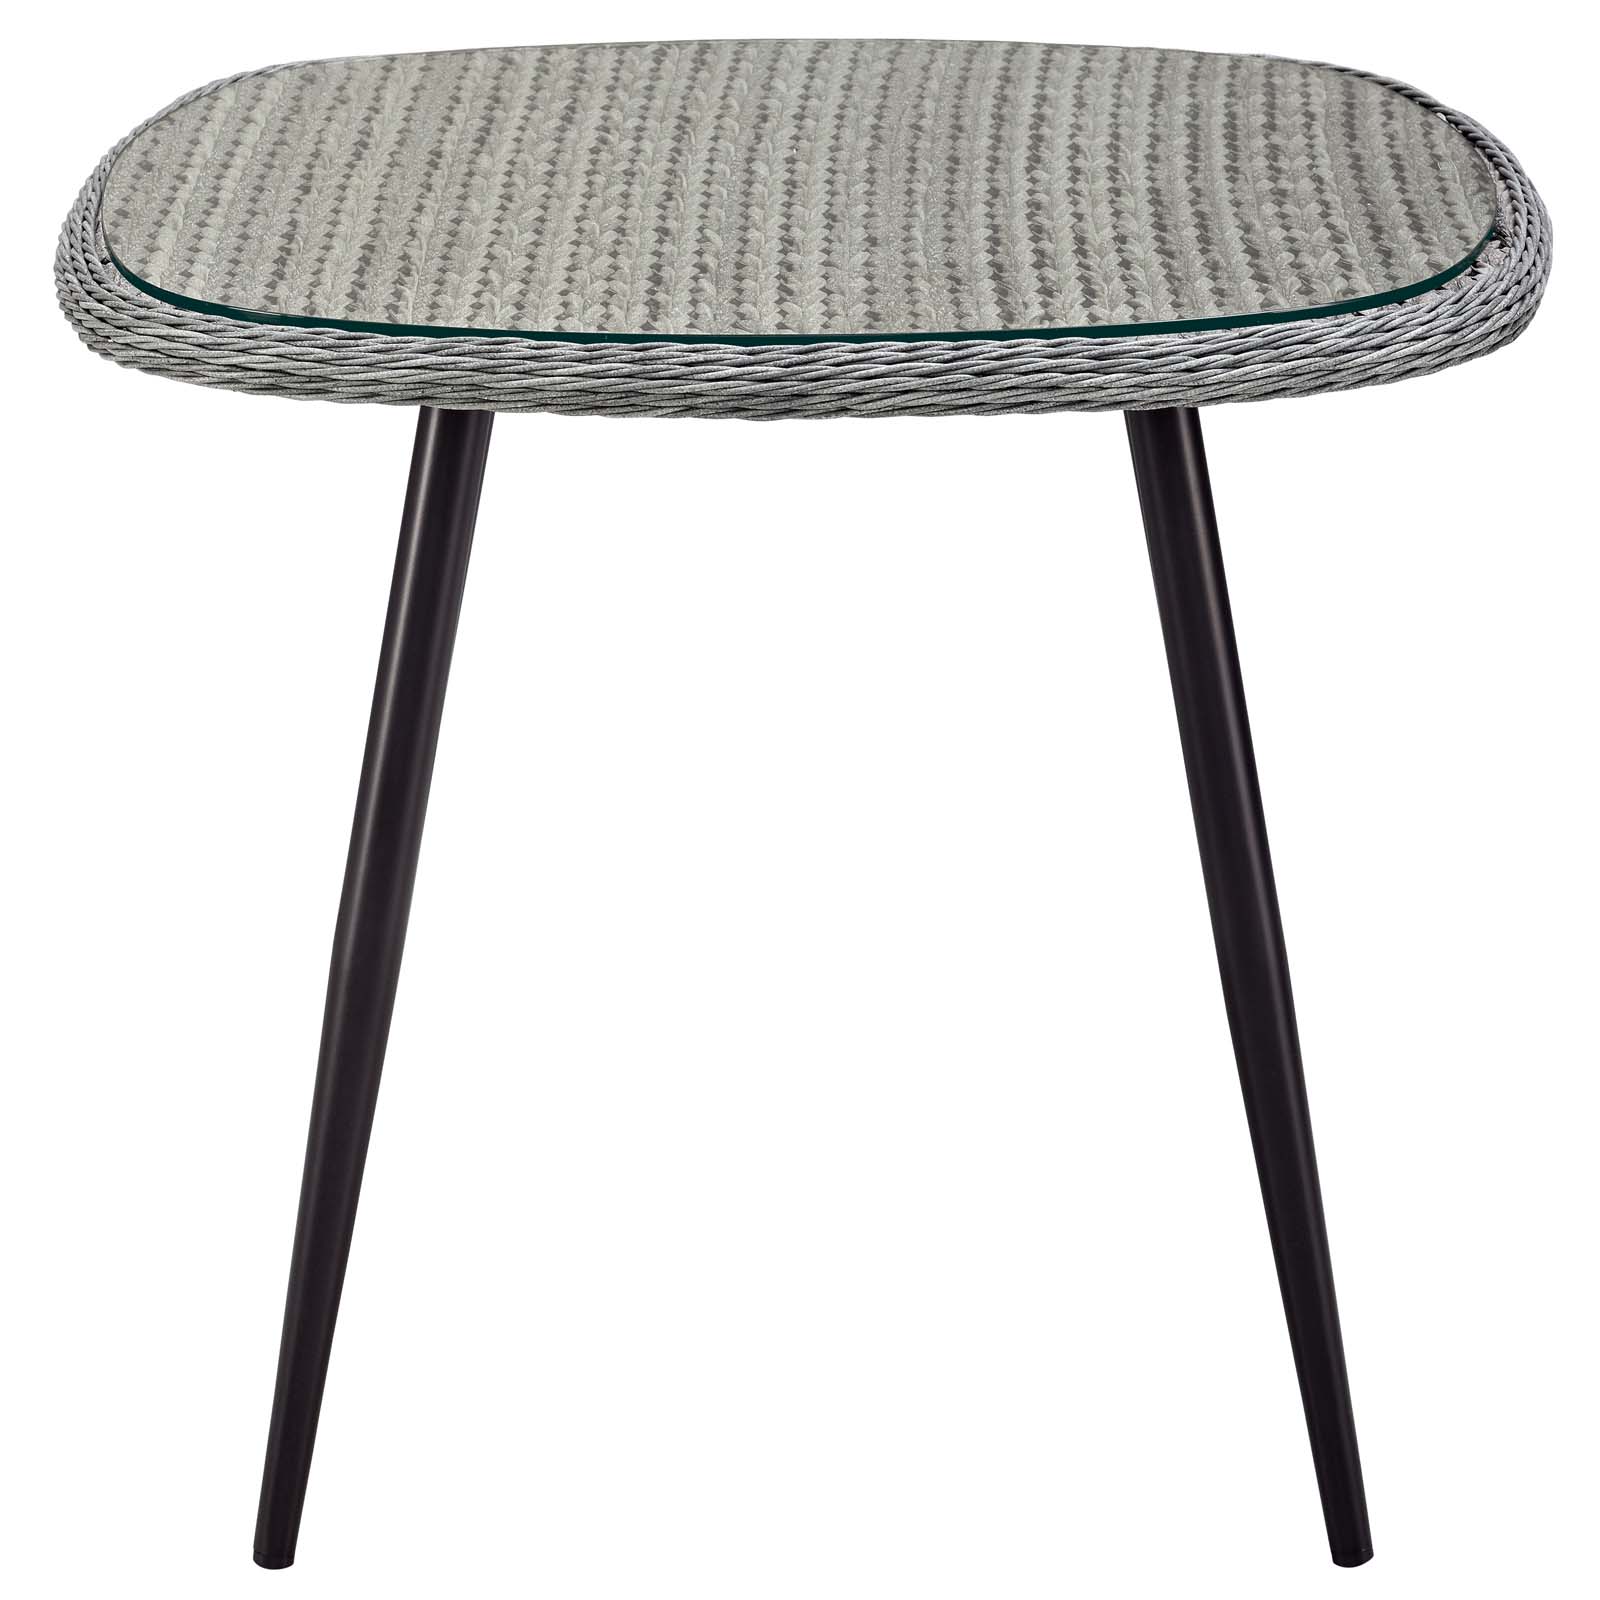 Modway Endeavor 36" Outdoor Patio Wicker Rattan Dining Table in Gray - image 3 of 5